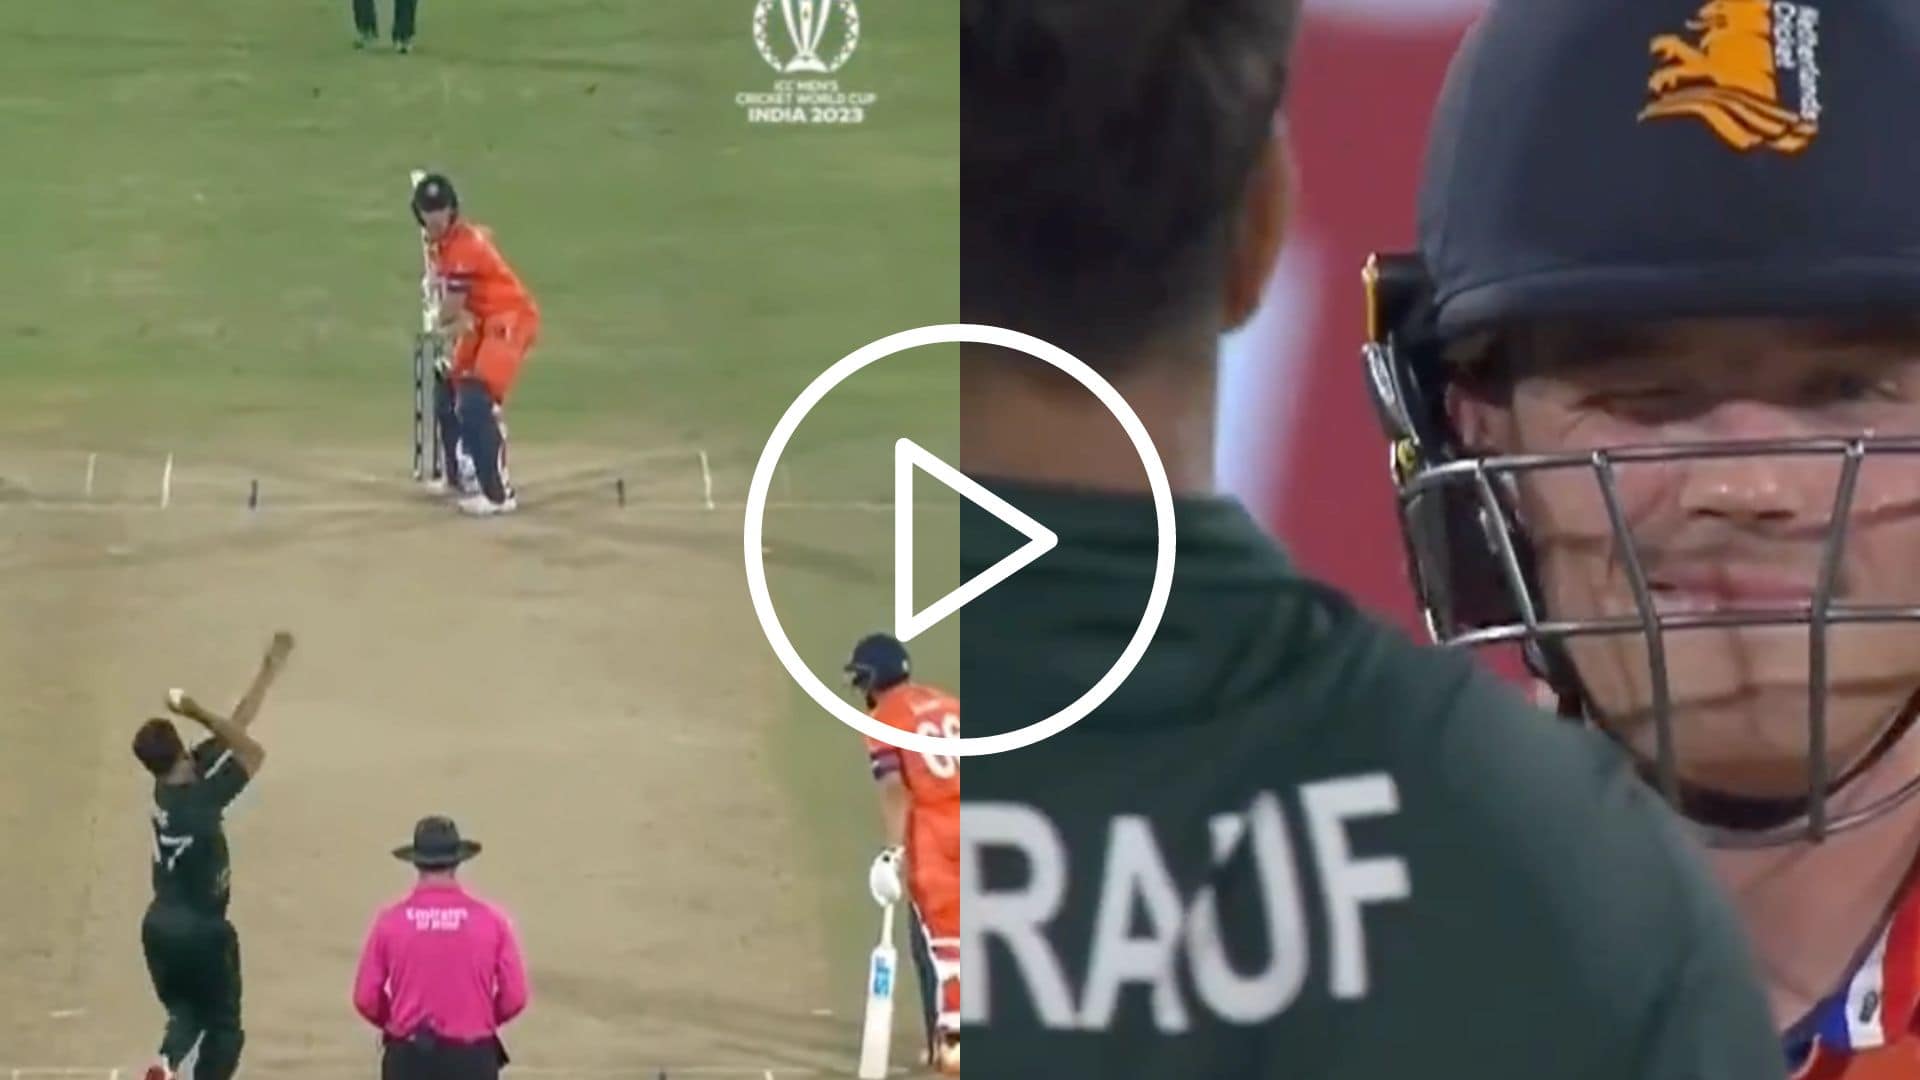 [Watch] Bas de Leede Gives Haris Rauf A ‘Wink’ After Six; Takes T20 World Cup Revenge